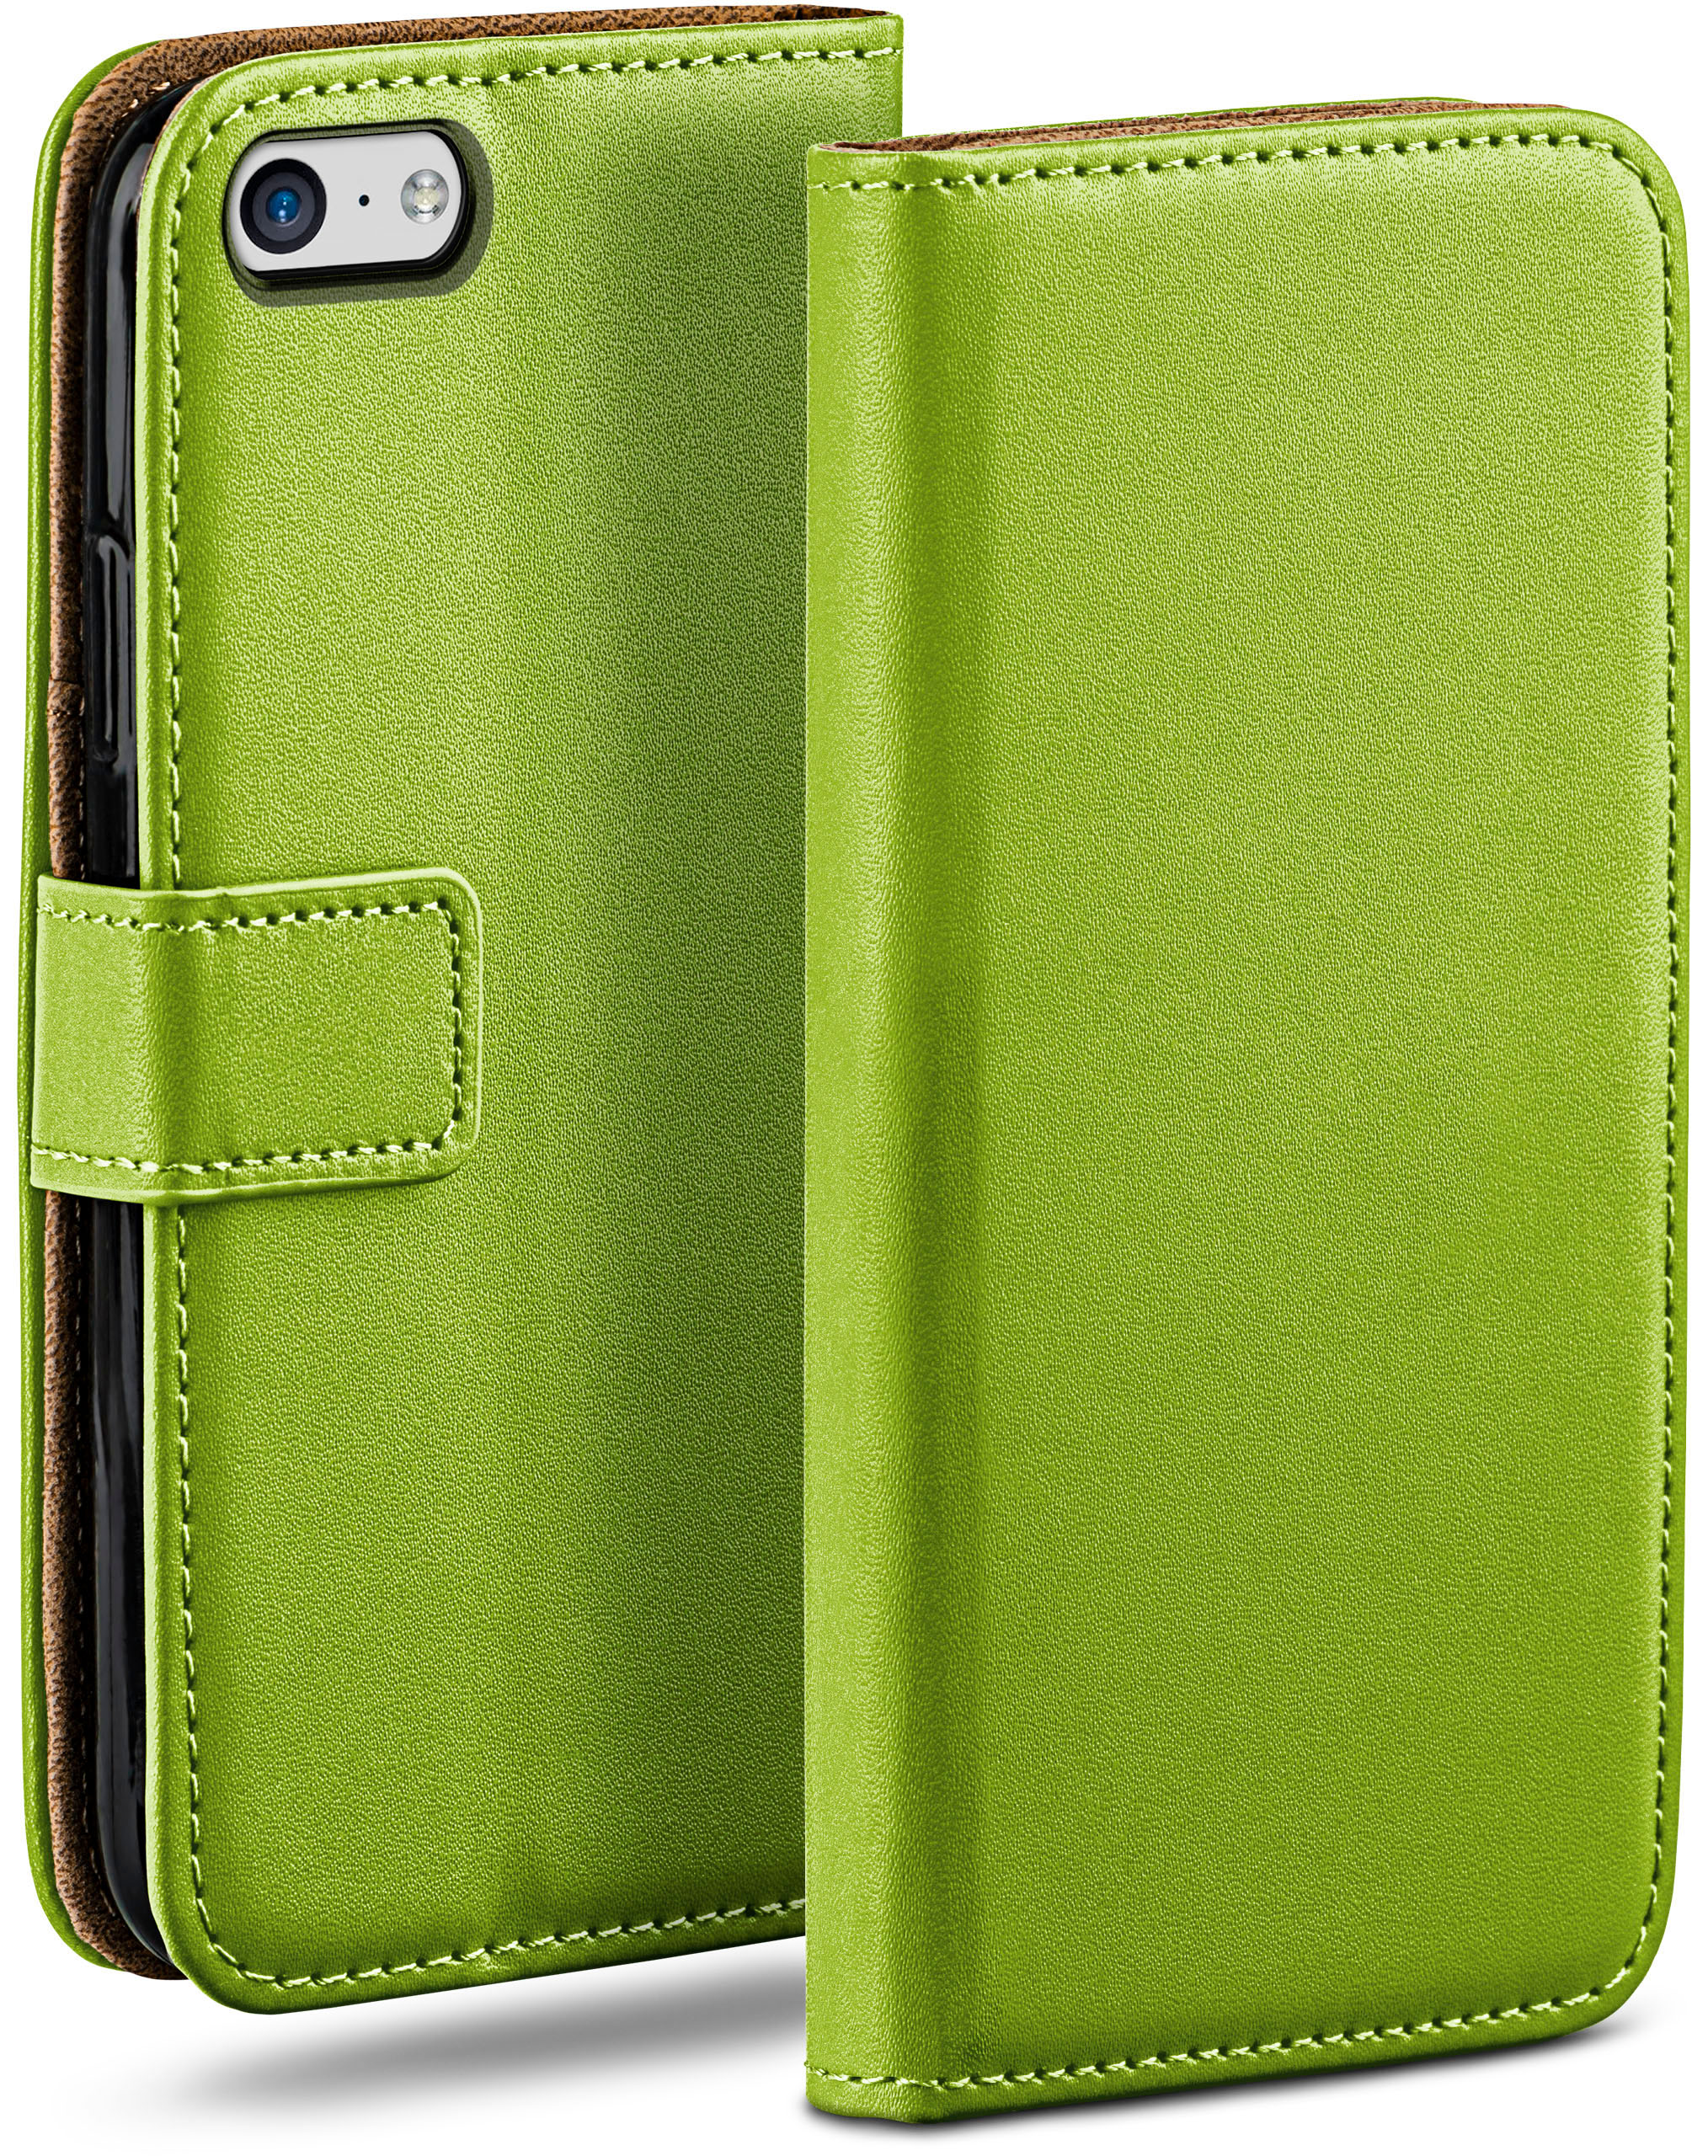 Lime-Green MOEX Bookcover, Apple, Book iPhone Case, 5c,